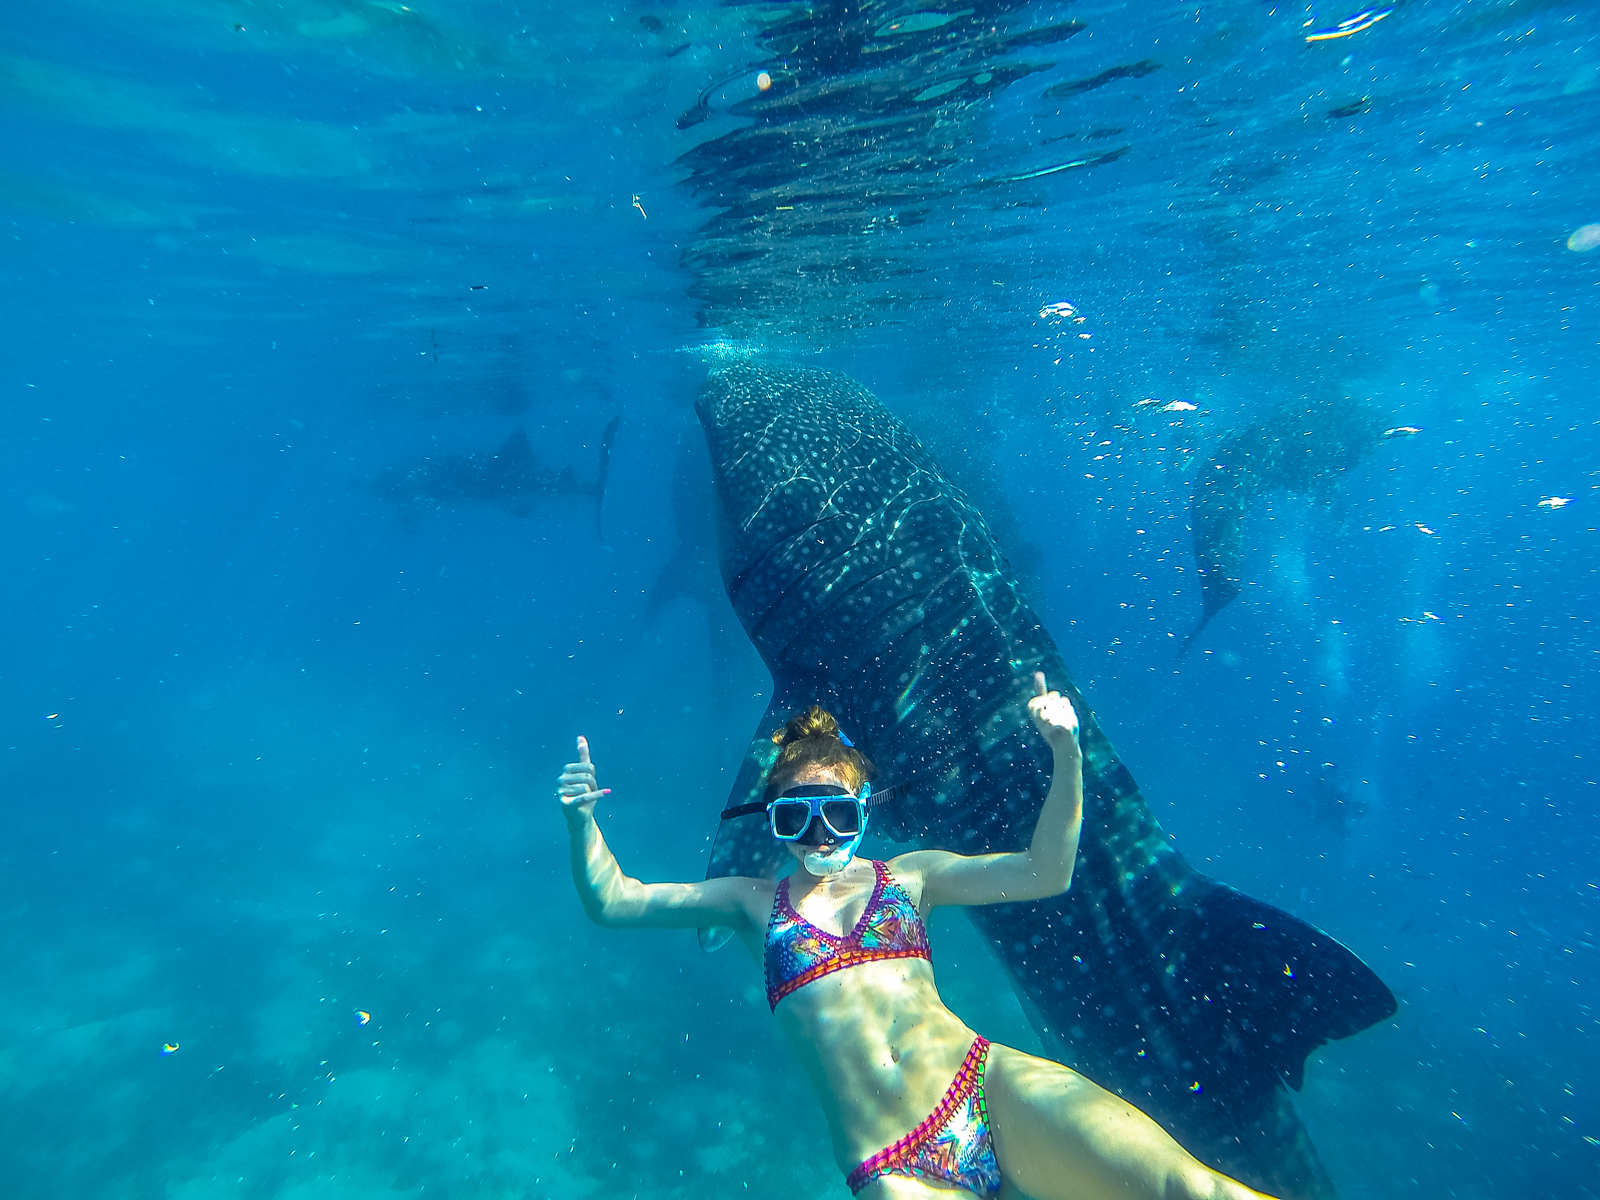 Swimming with whale sharks in the Philippines